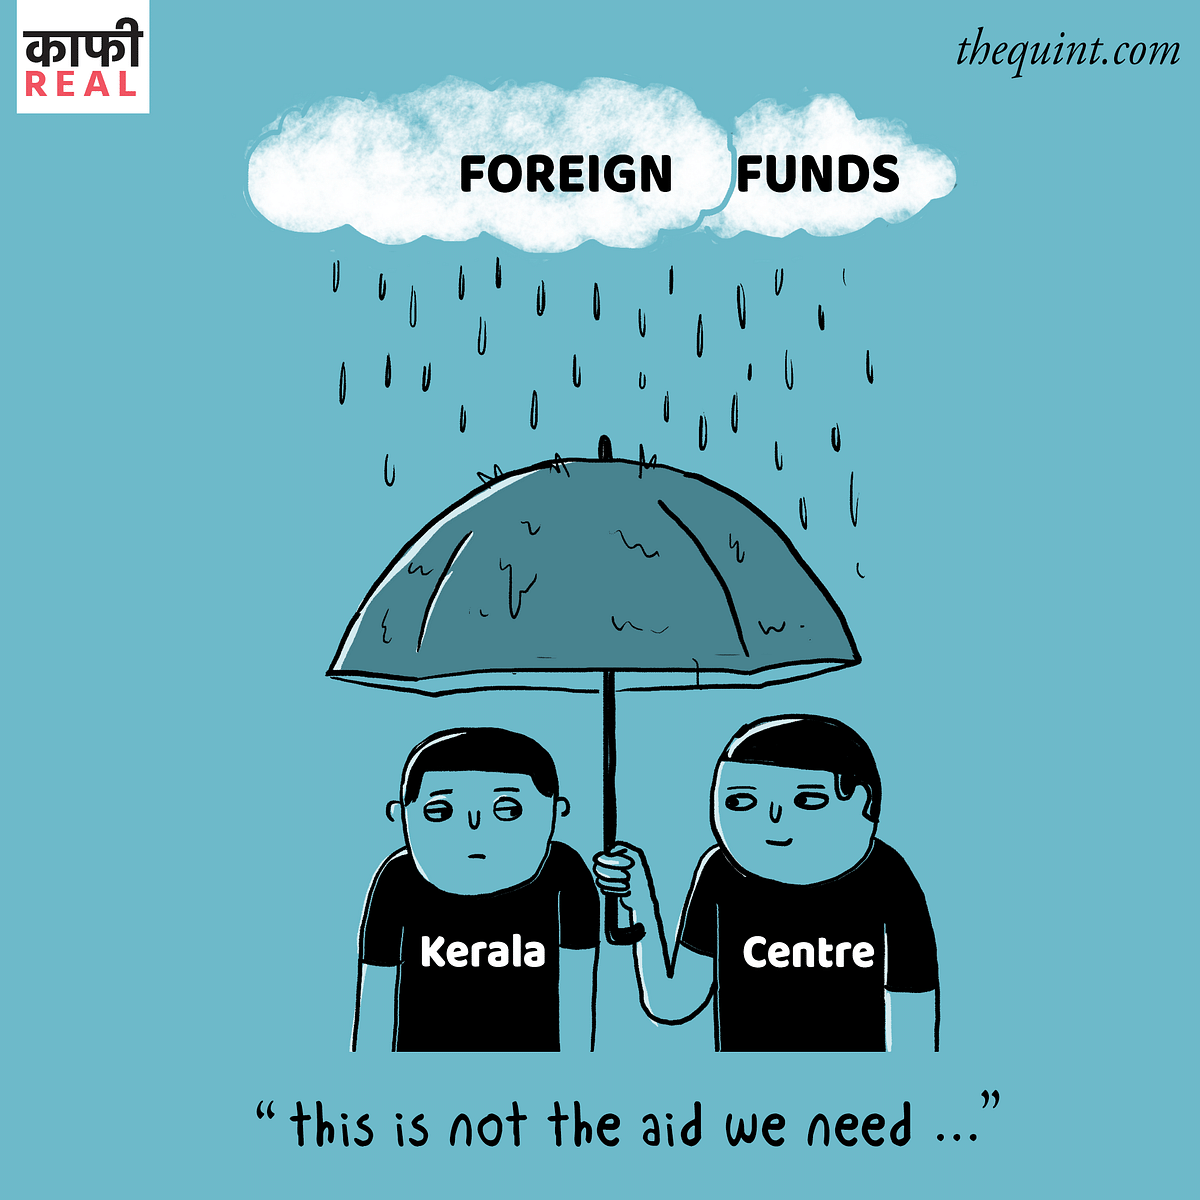 Kaafi Real Cartoon: Now that the devastation is done, Centre steps in to save Keralites from a flood of foreign aid.